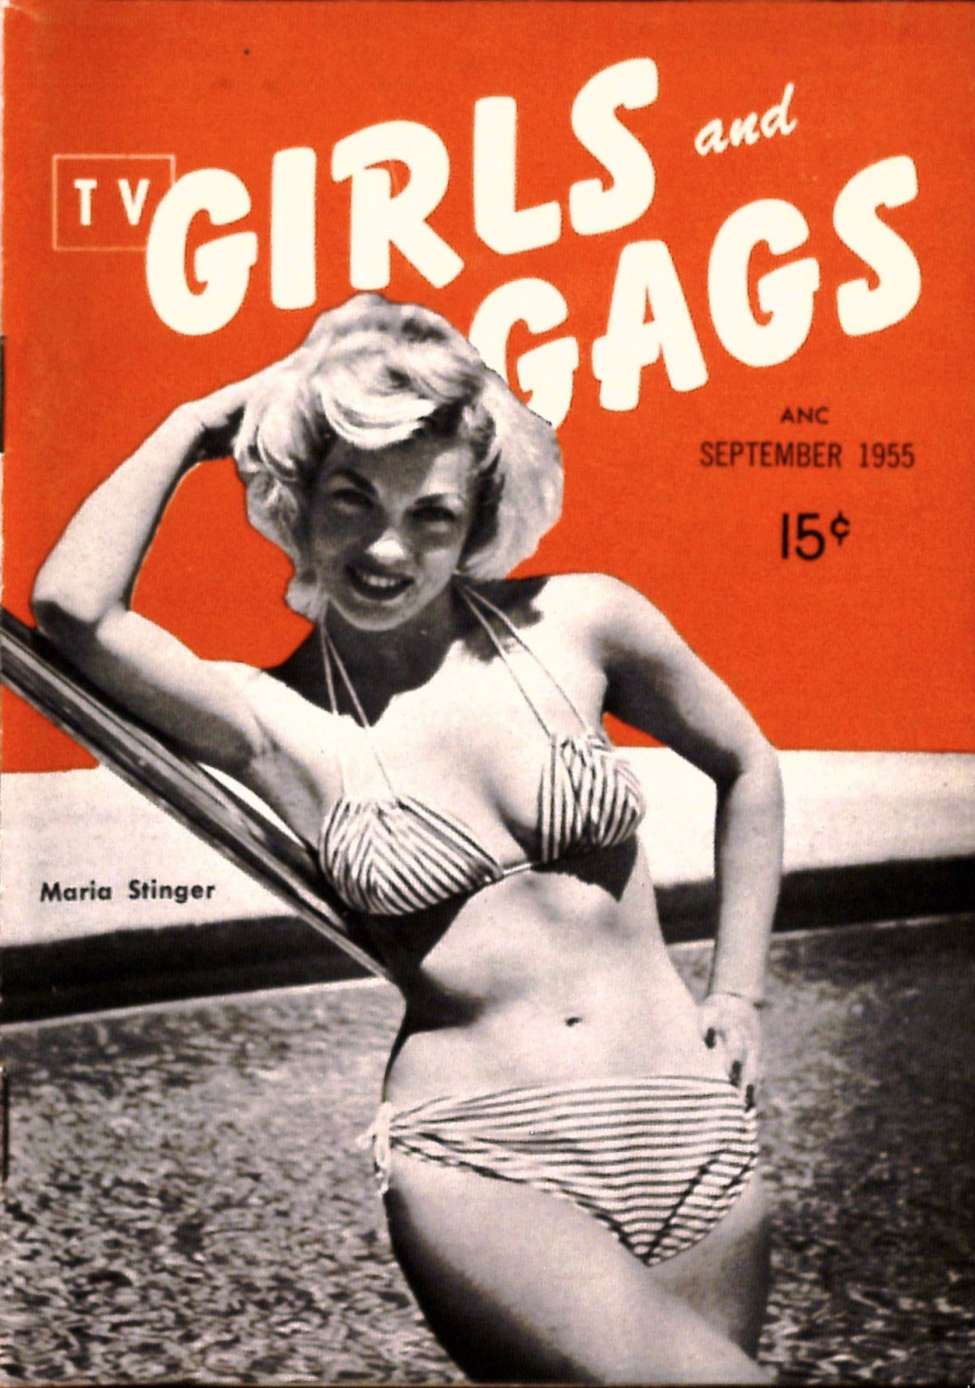 Book Cover For TV Girls and Gags v2 2